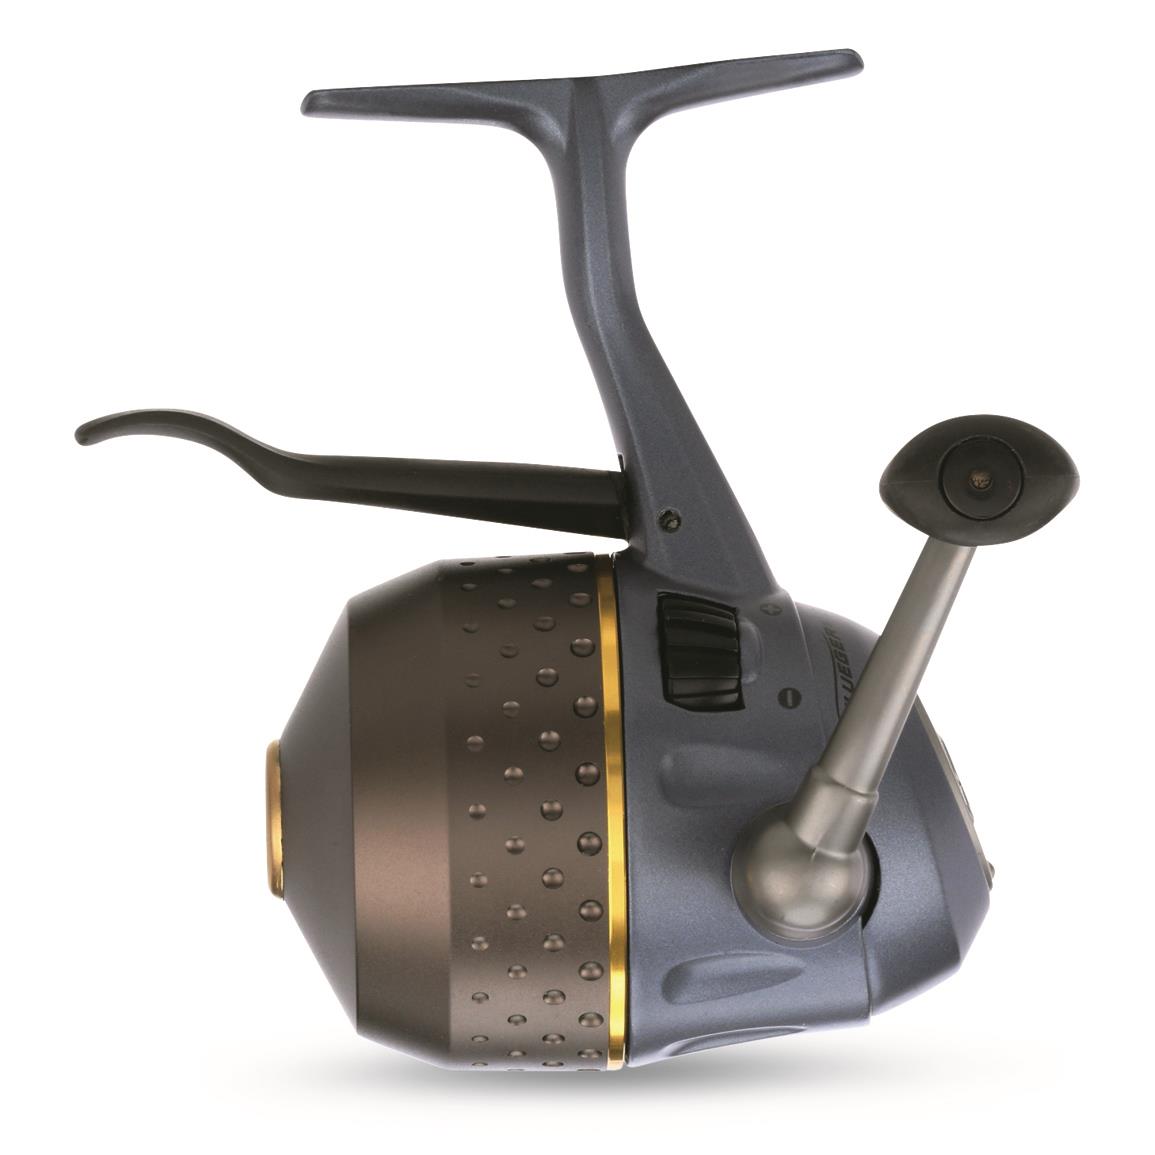 Zebco 33 Gold Spincast Fishing Reel, 3 Ball Bearings, Instant Anti-Reverse  with a Smooth Dial-Adjustable Drag, Powerful All-Metal Gears with a  Lightweight Graphite Frame, New Model